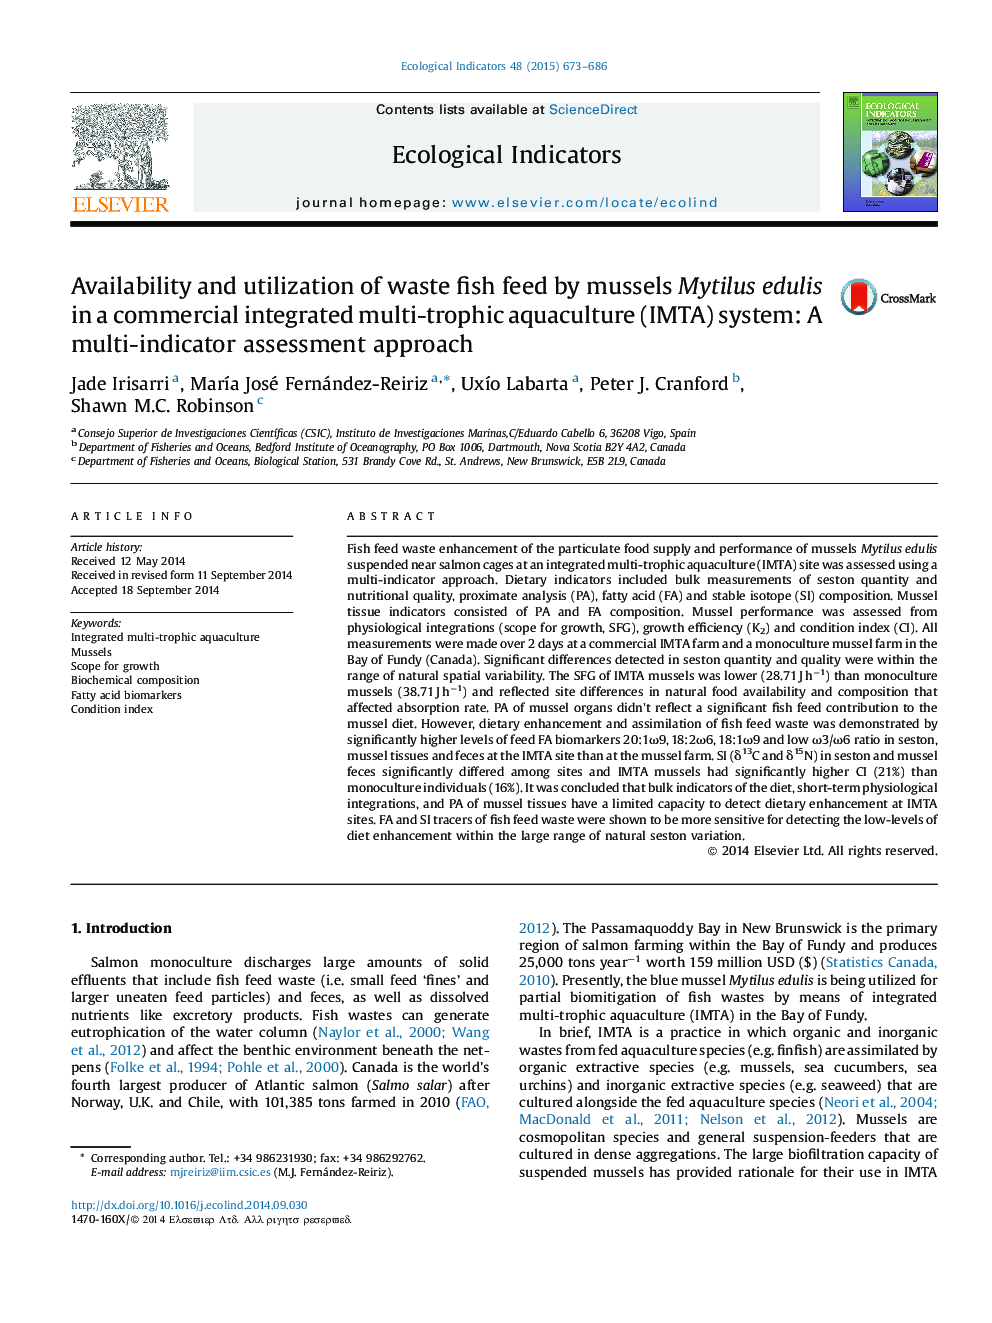 Availability and utilization of waste fish feed by mussels Mytilus edulis in a commercial integrated multi-trophic aquaculture (IMTA) system: A multi-indicator assessment approach